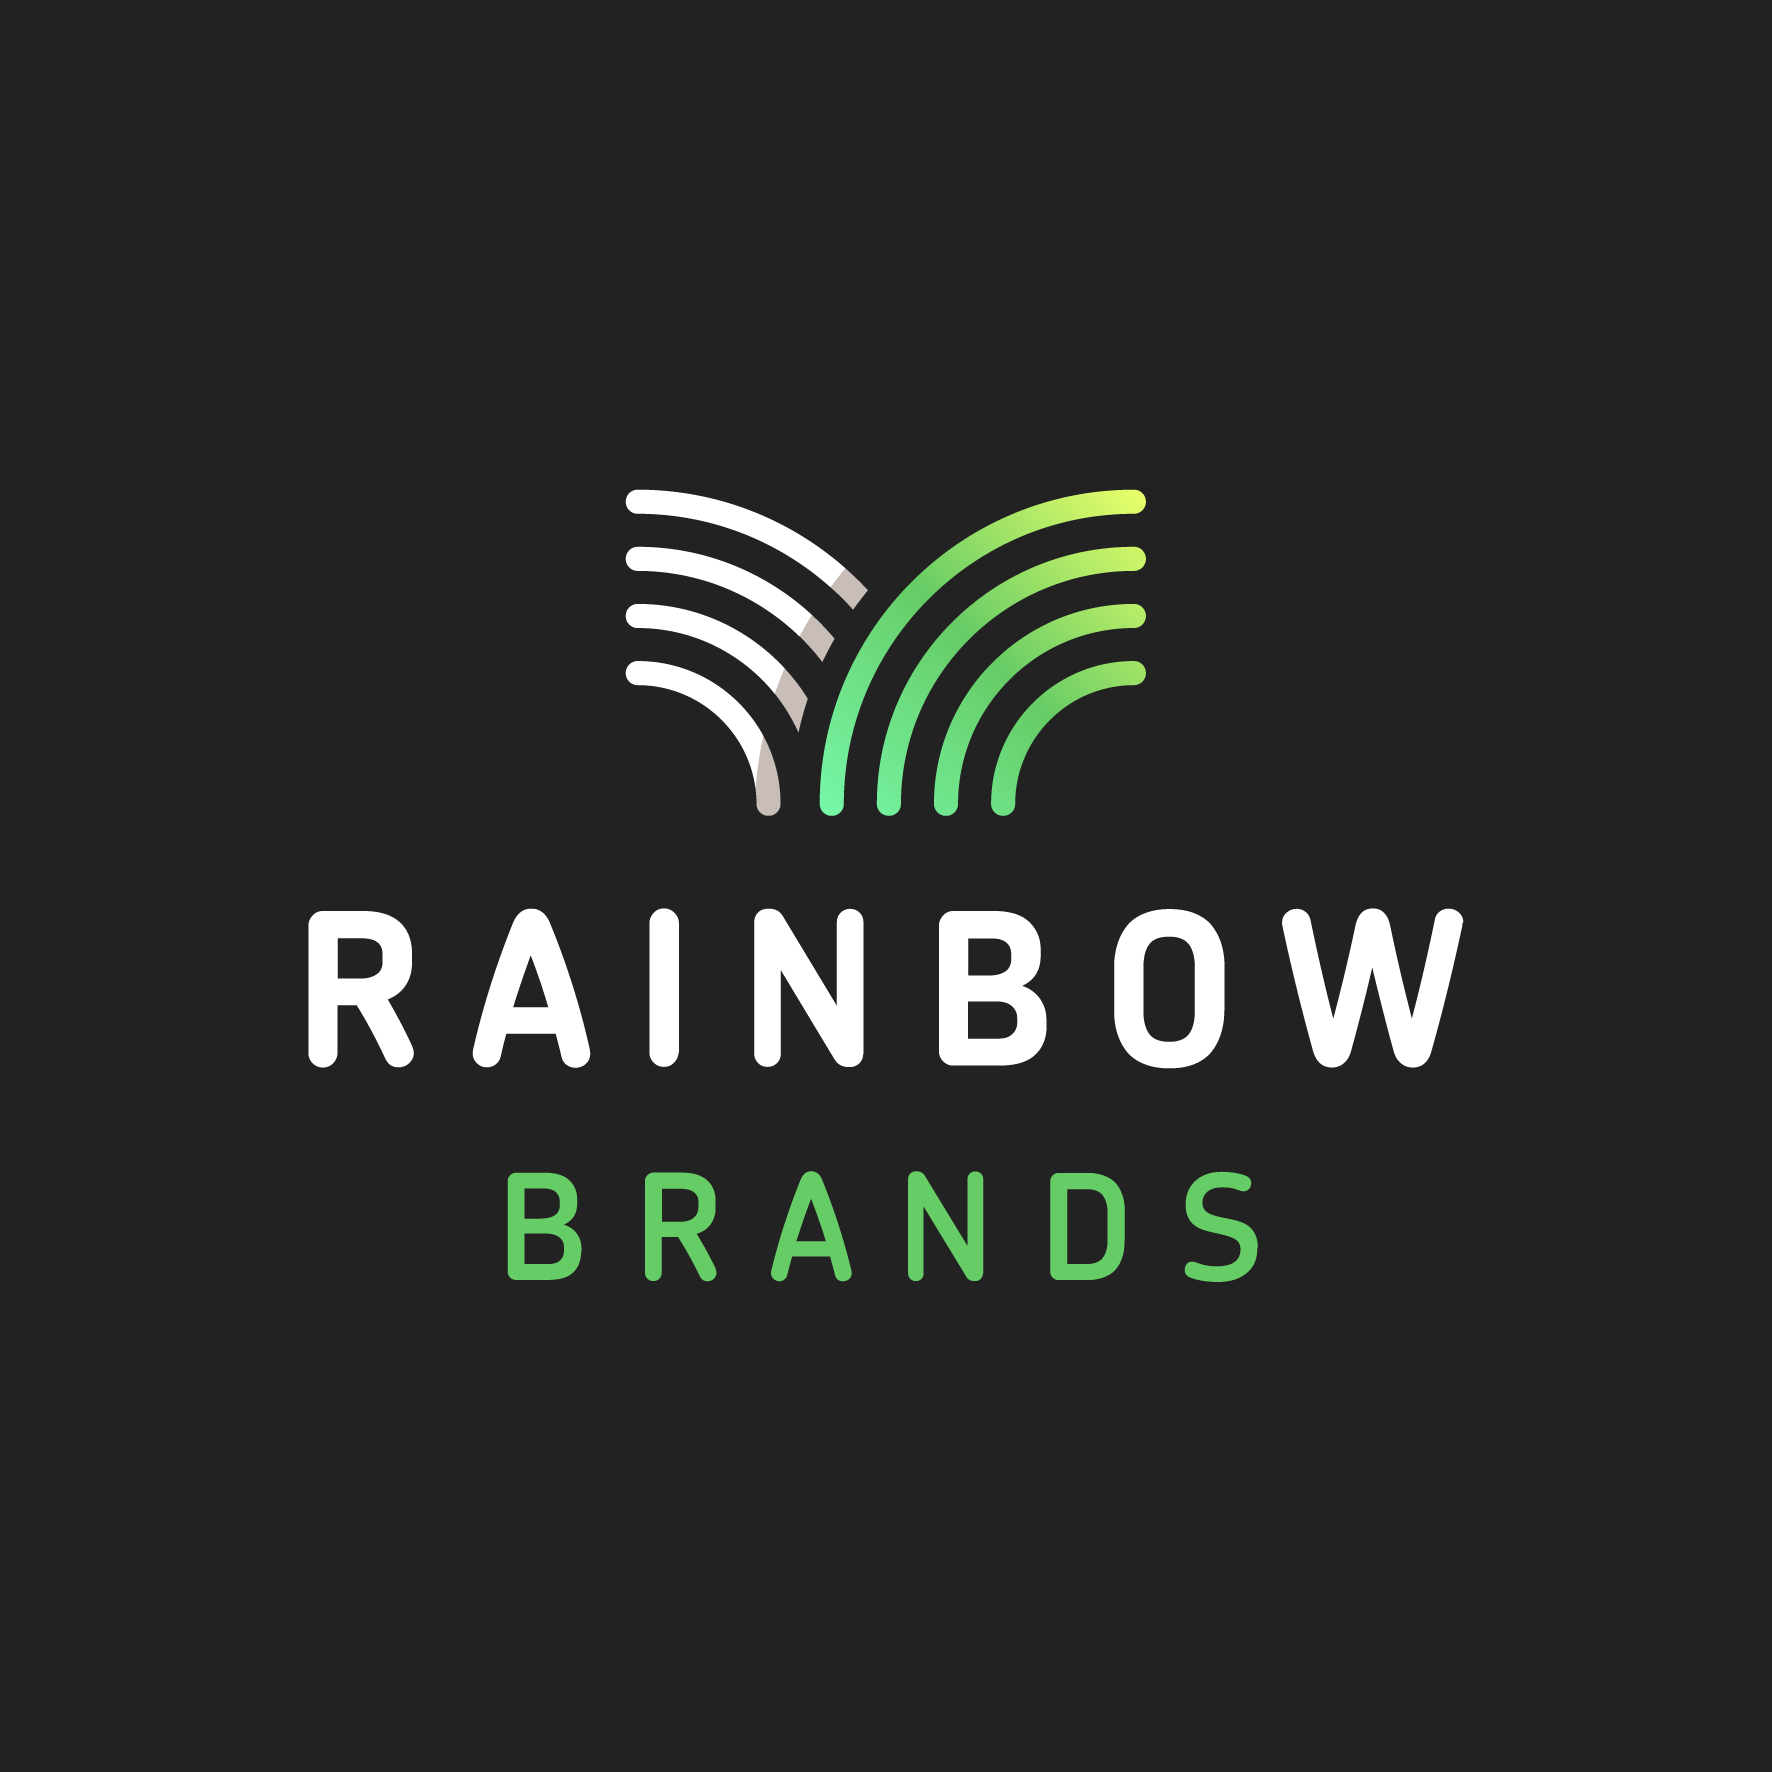 Rainbow Brands are supporting Status Row